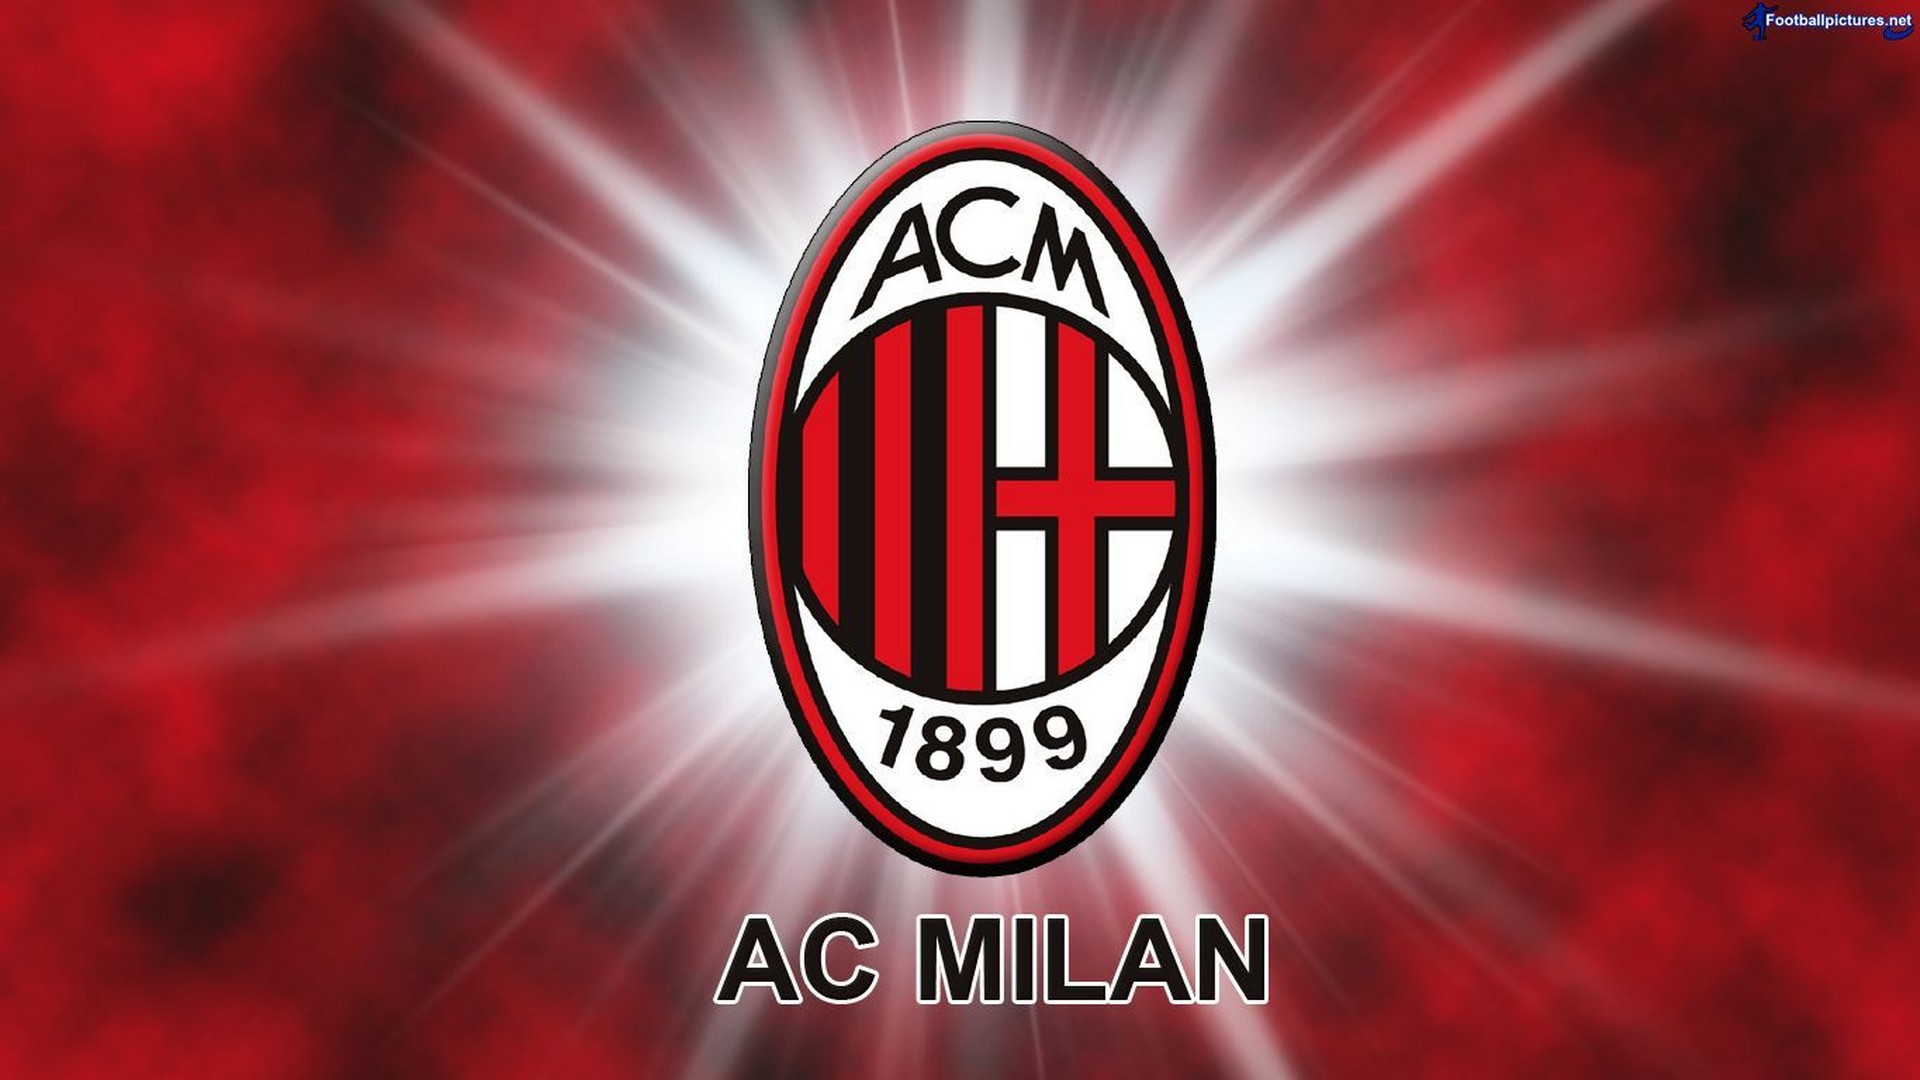 AC Milan Wallpaper with high-resolution 1920x1080 pixel. You can use this wallpaper for your Desktop Computers, Mac Screensavers, Windows Backgrounds, iPhone Wallpapers, Tablet or Android Lock screen and another Mobile device